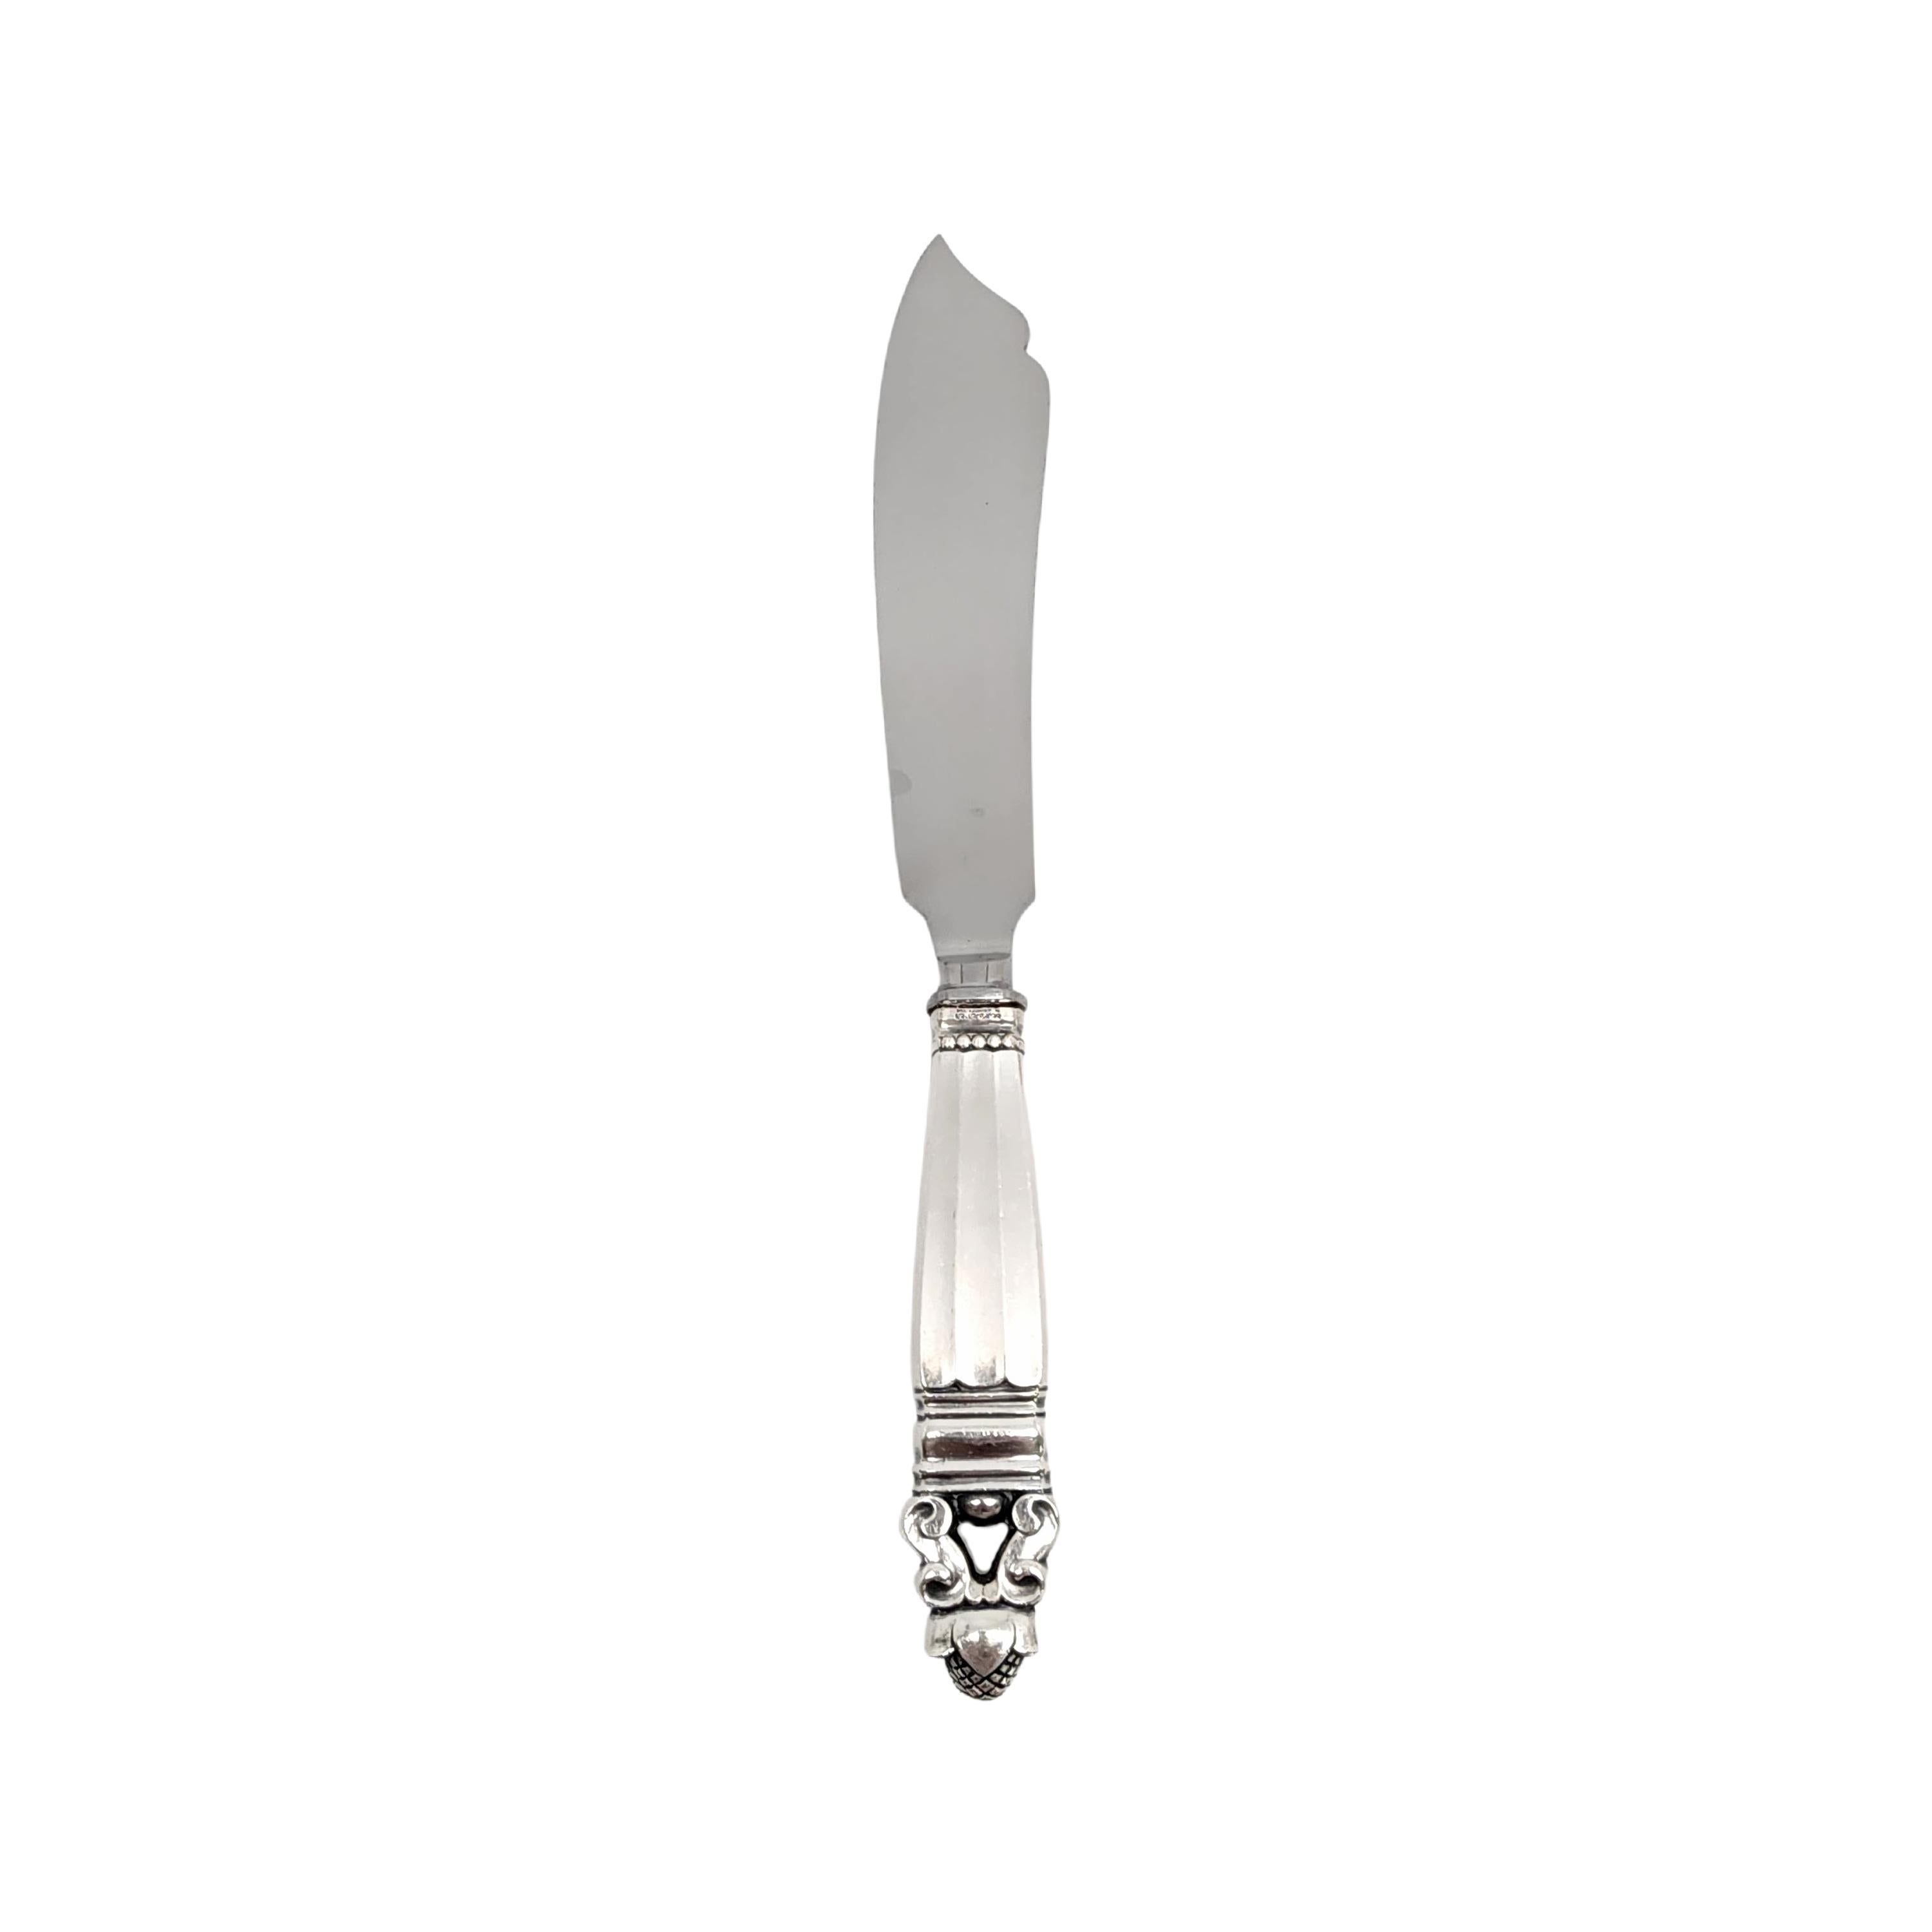 Sterling silver handle stainless blade cake knife in the Acorn pattern by Georg Jensen.

The Acorn pattern was introduced in 1915 as a collaboration between Georg Jensen and designer Johan Ronde. The Acorn pattern, which combines Art Nouveau and Art